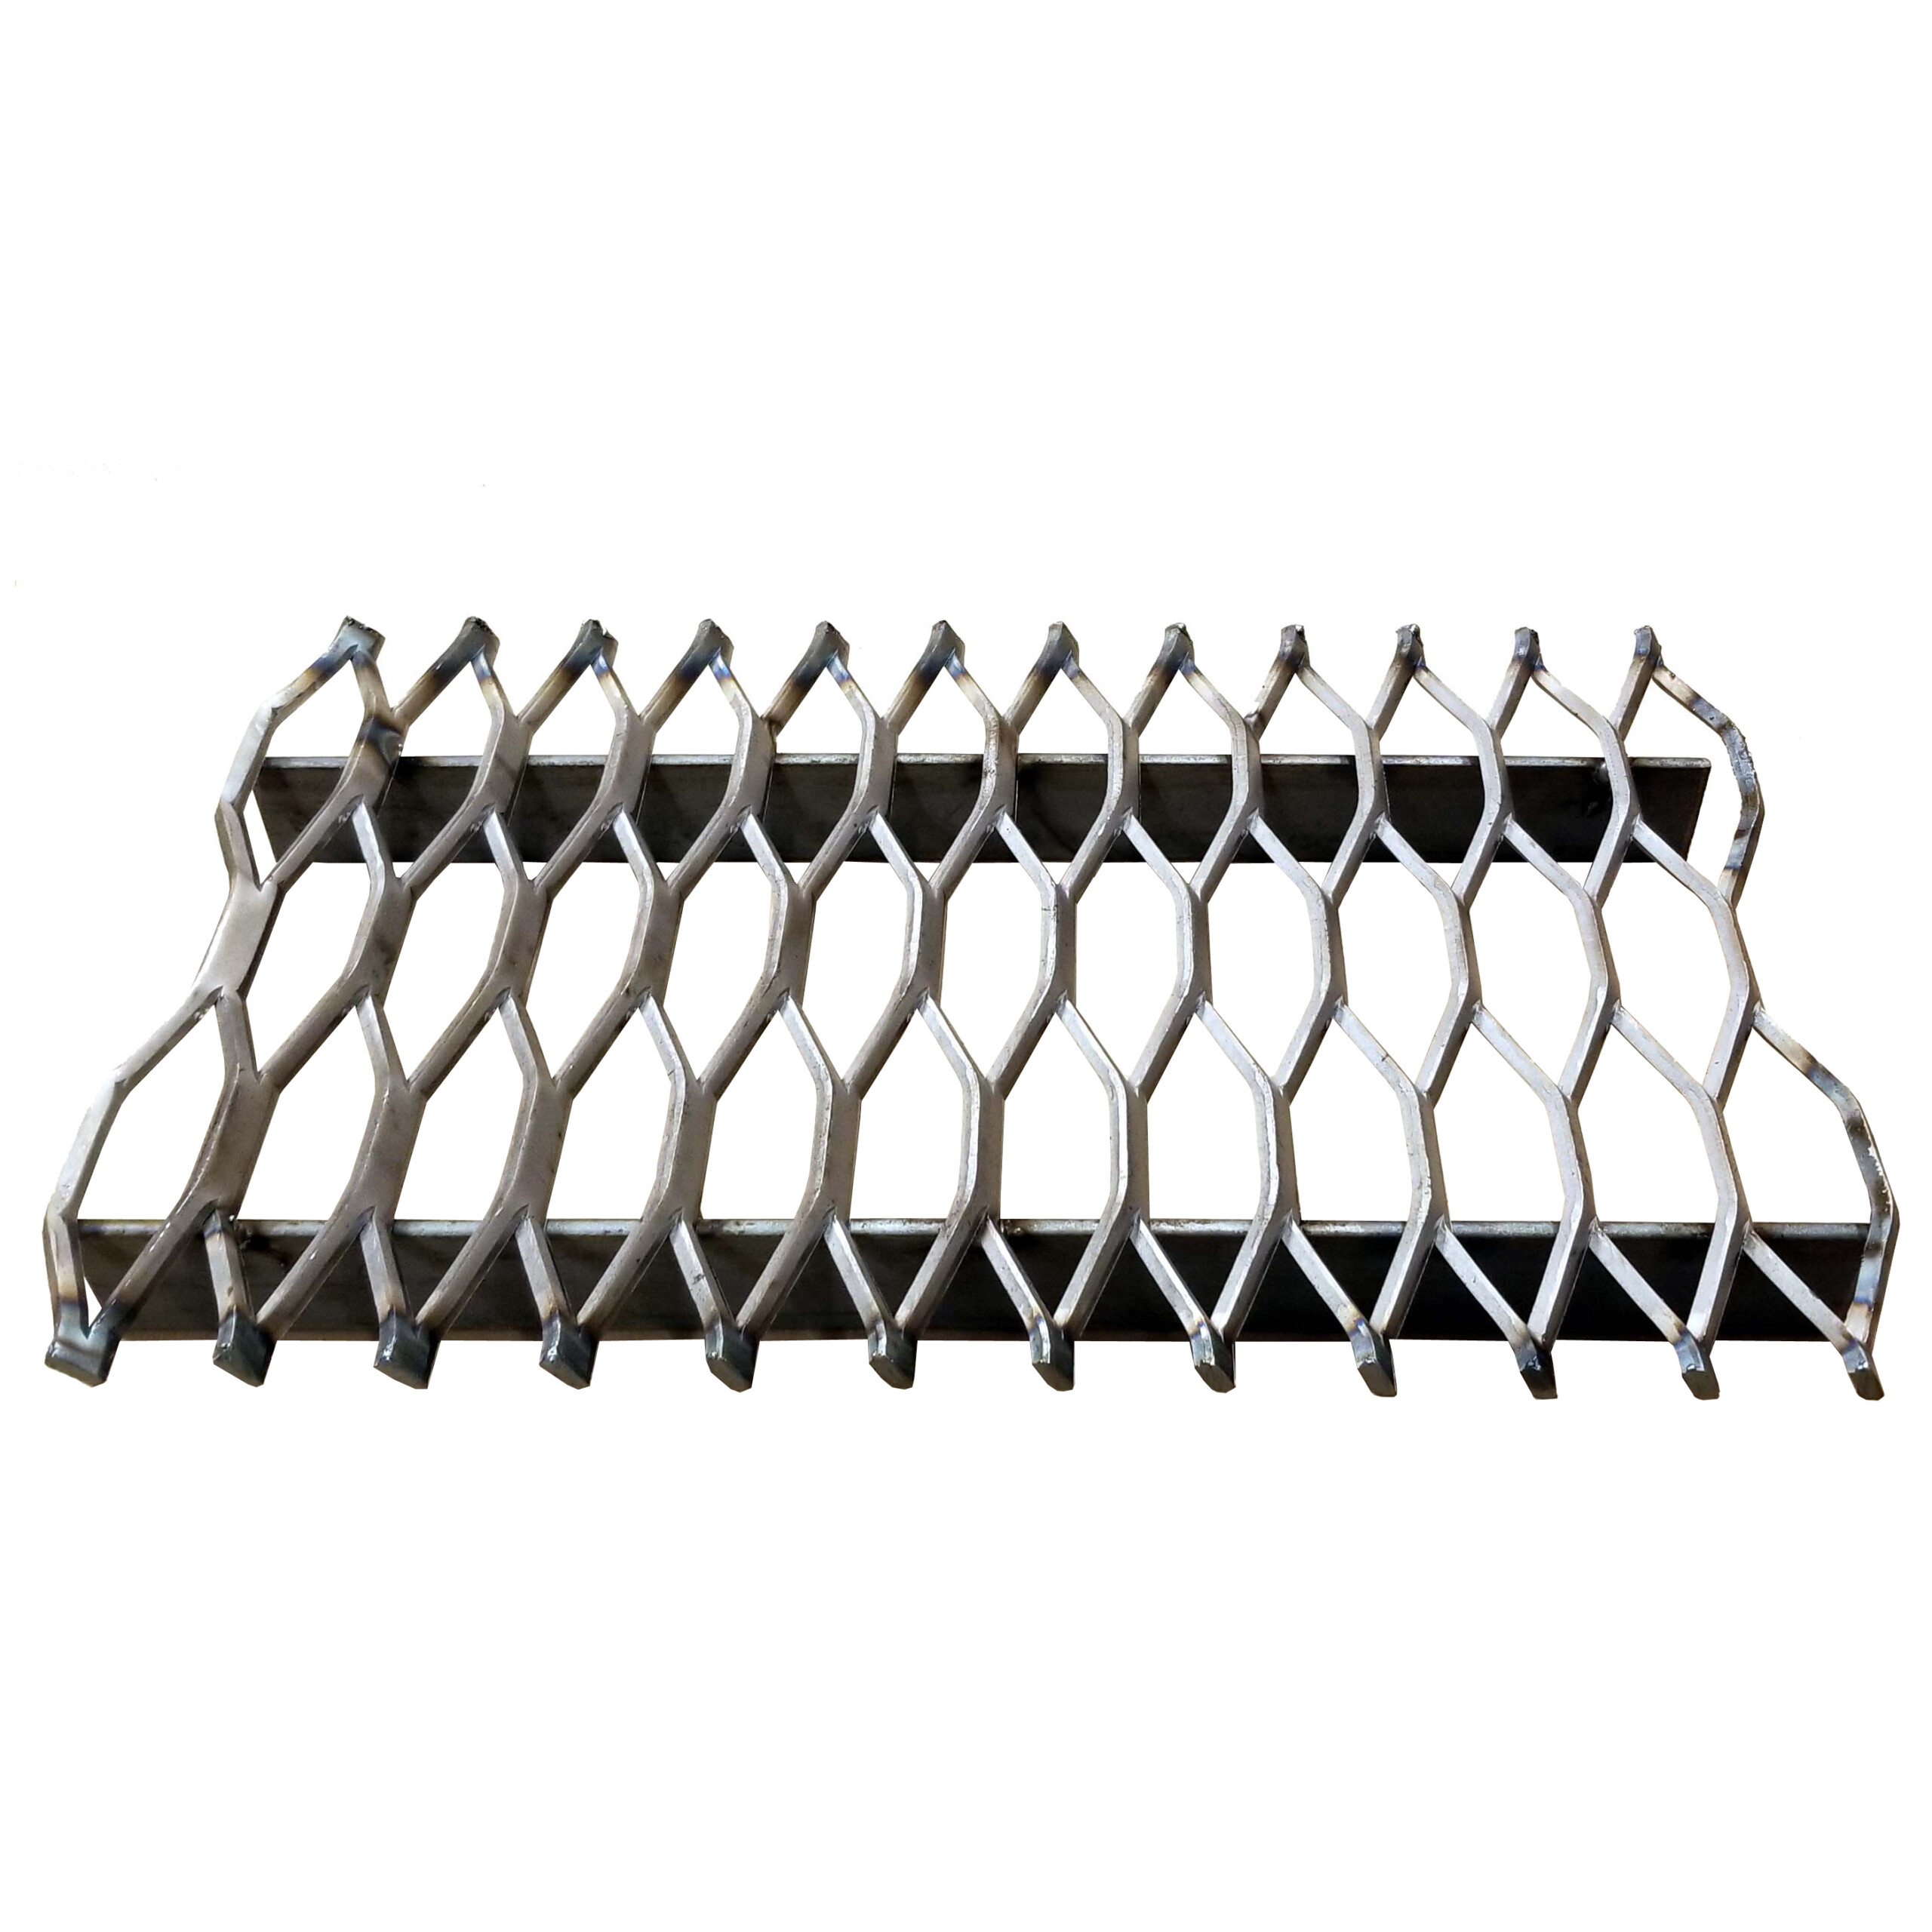 Heavy-Duty Charcoal Grate 9 X 14 For 16 Classic (Item#, 51% OFF